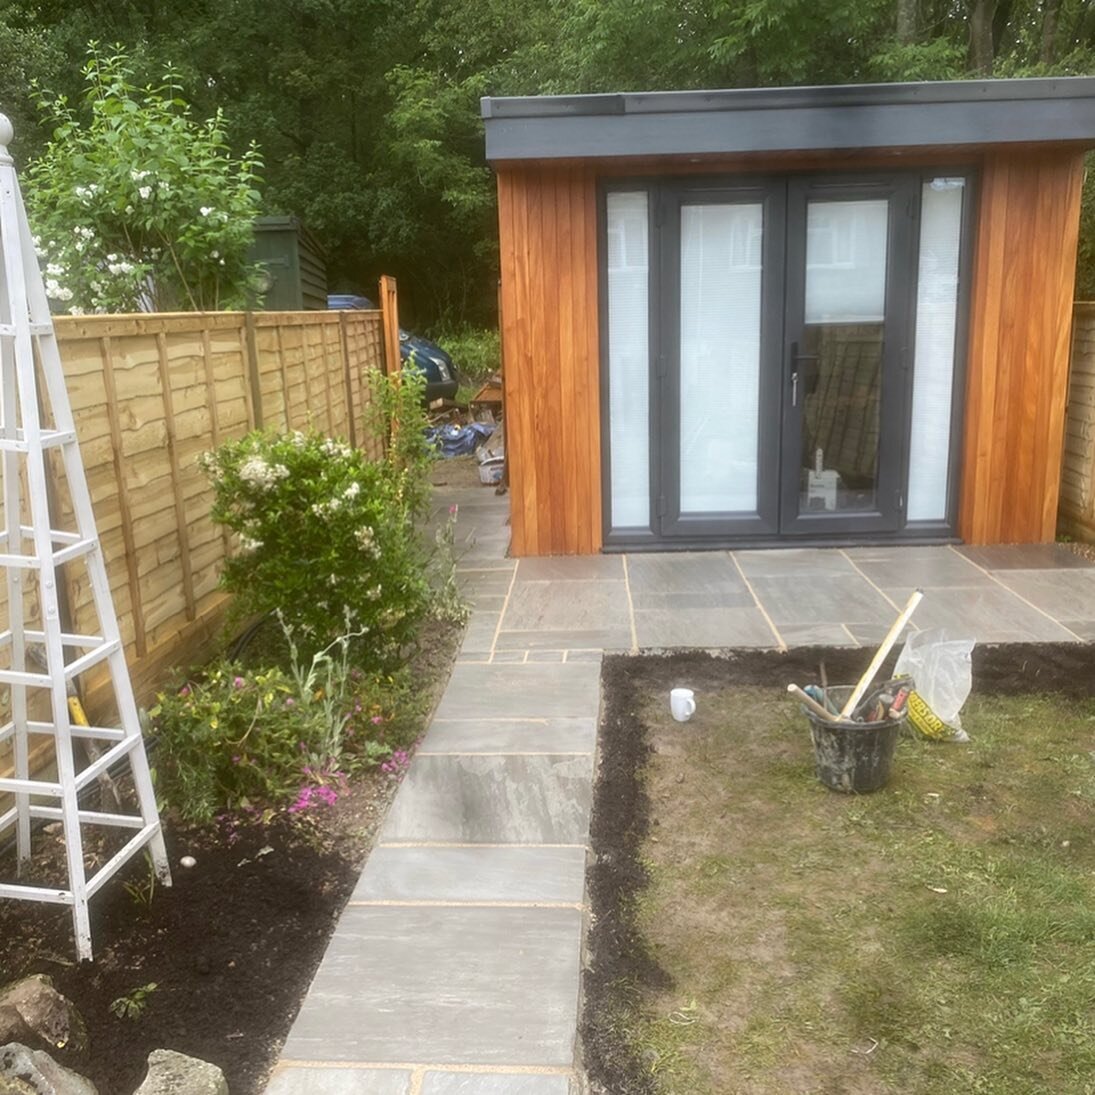 Another transformation this week completed in Oxted. Removing the old broken concrete path and replacing it with these stunning grey slabs all the way through to the rear fence, and laying a patio to the front of the garden office finishing this gard